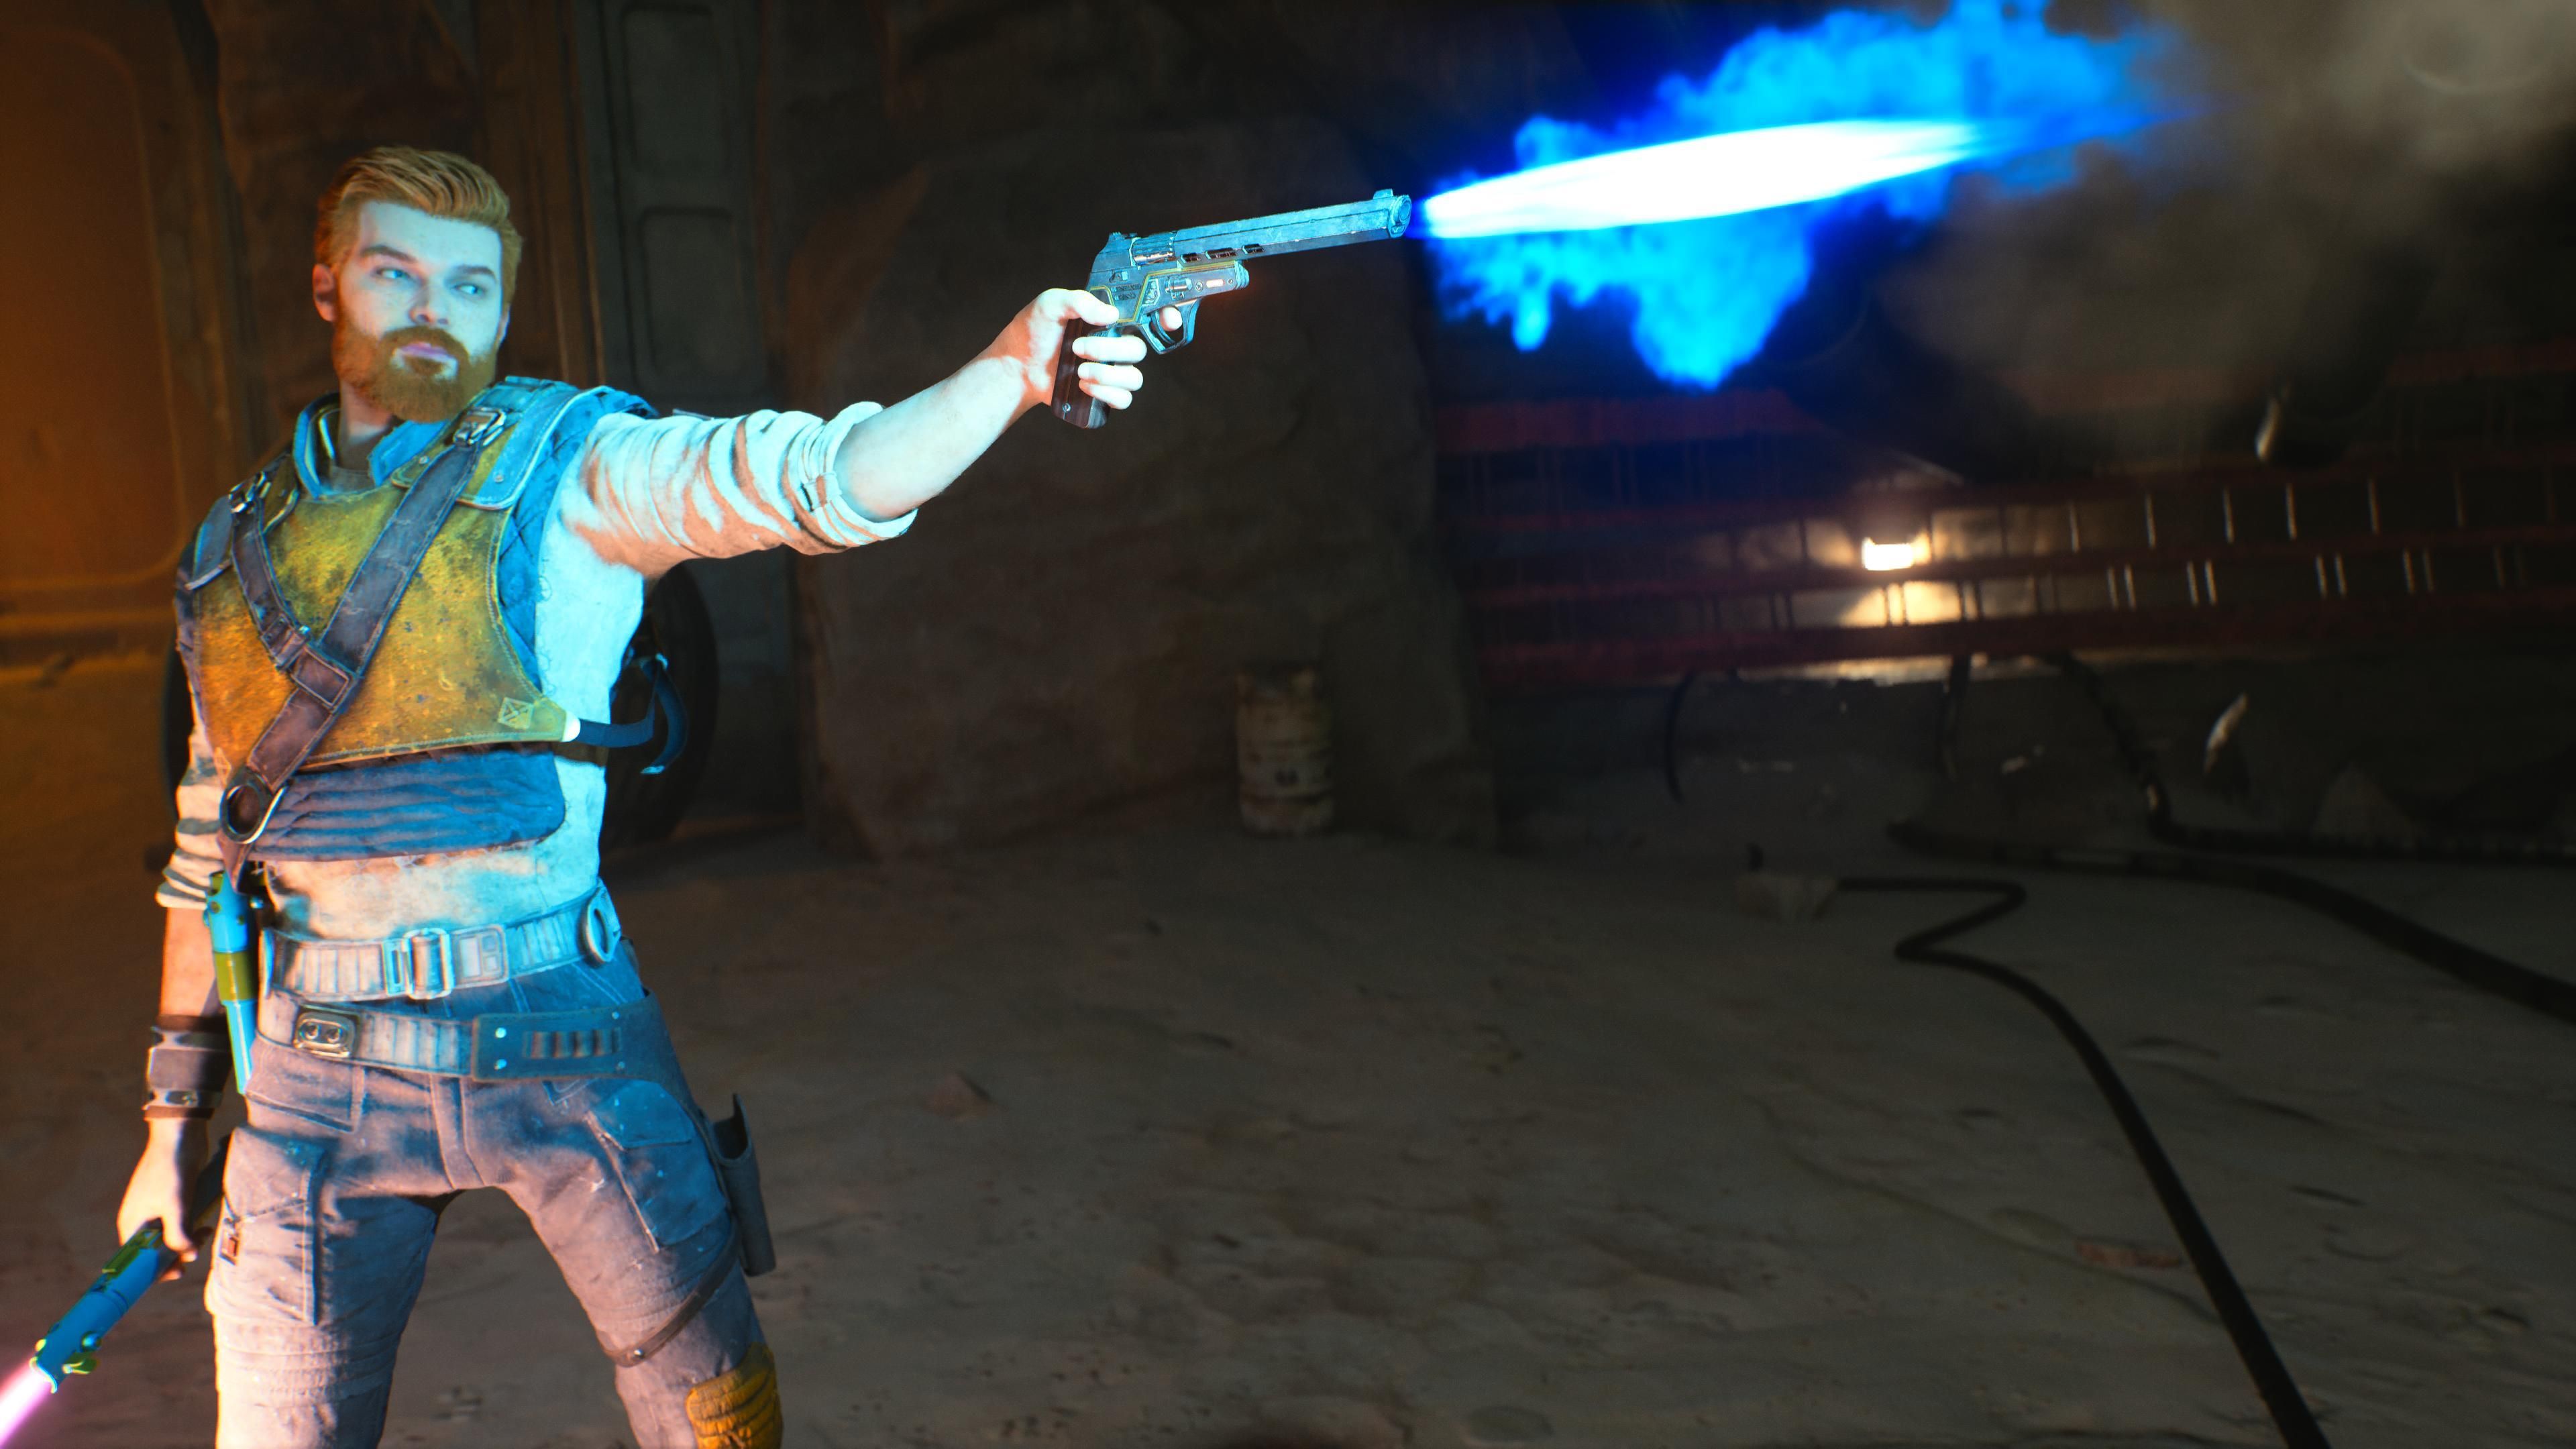 Cal shooting from his blaster in Star Wars Jedi: Survivor.